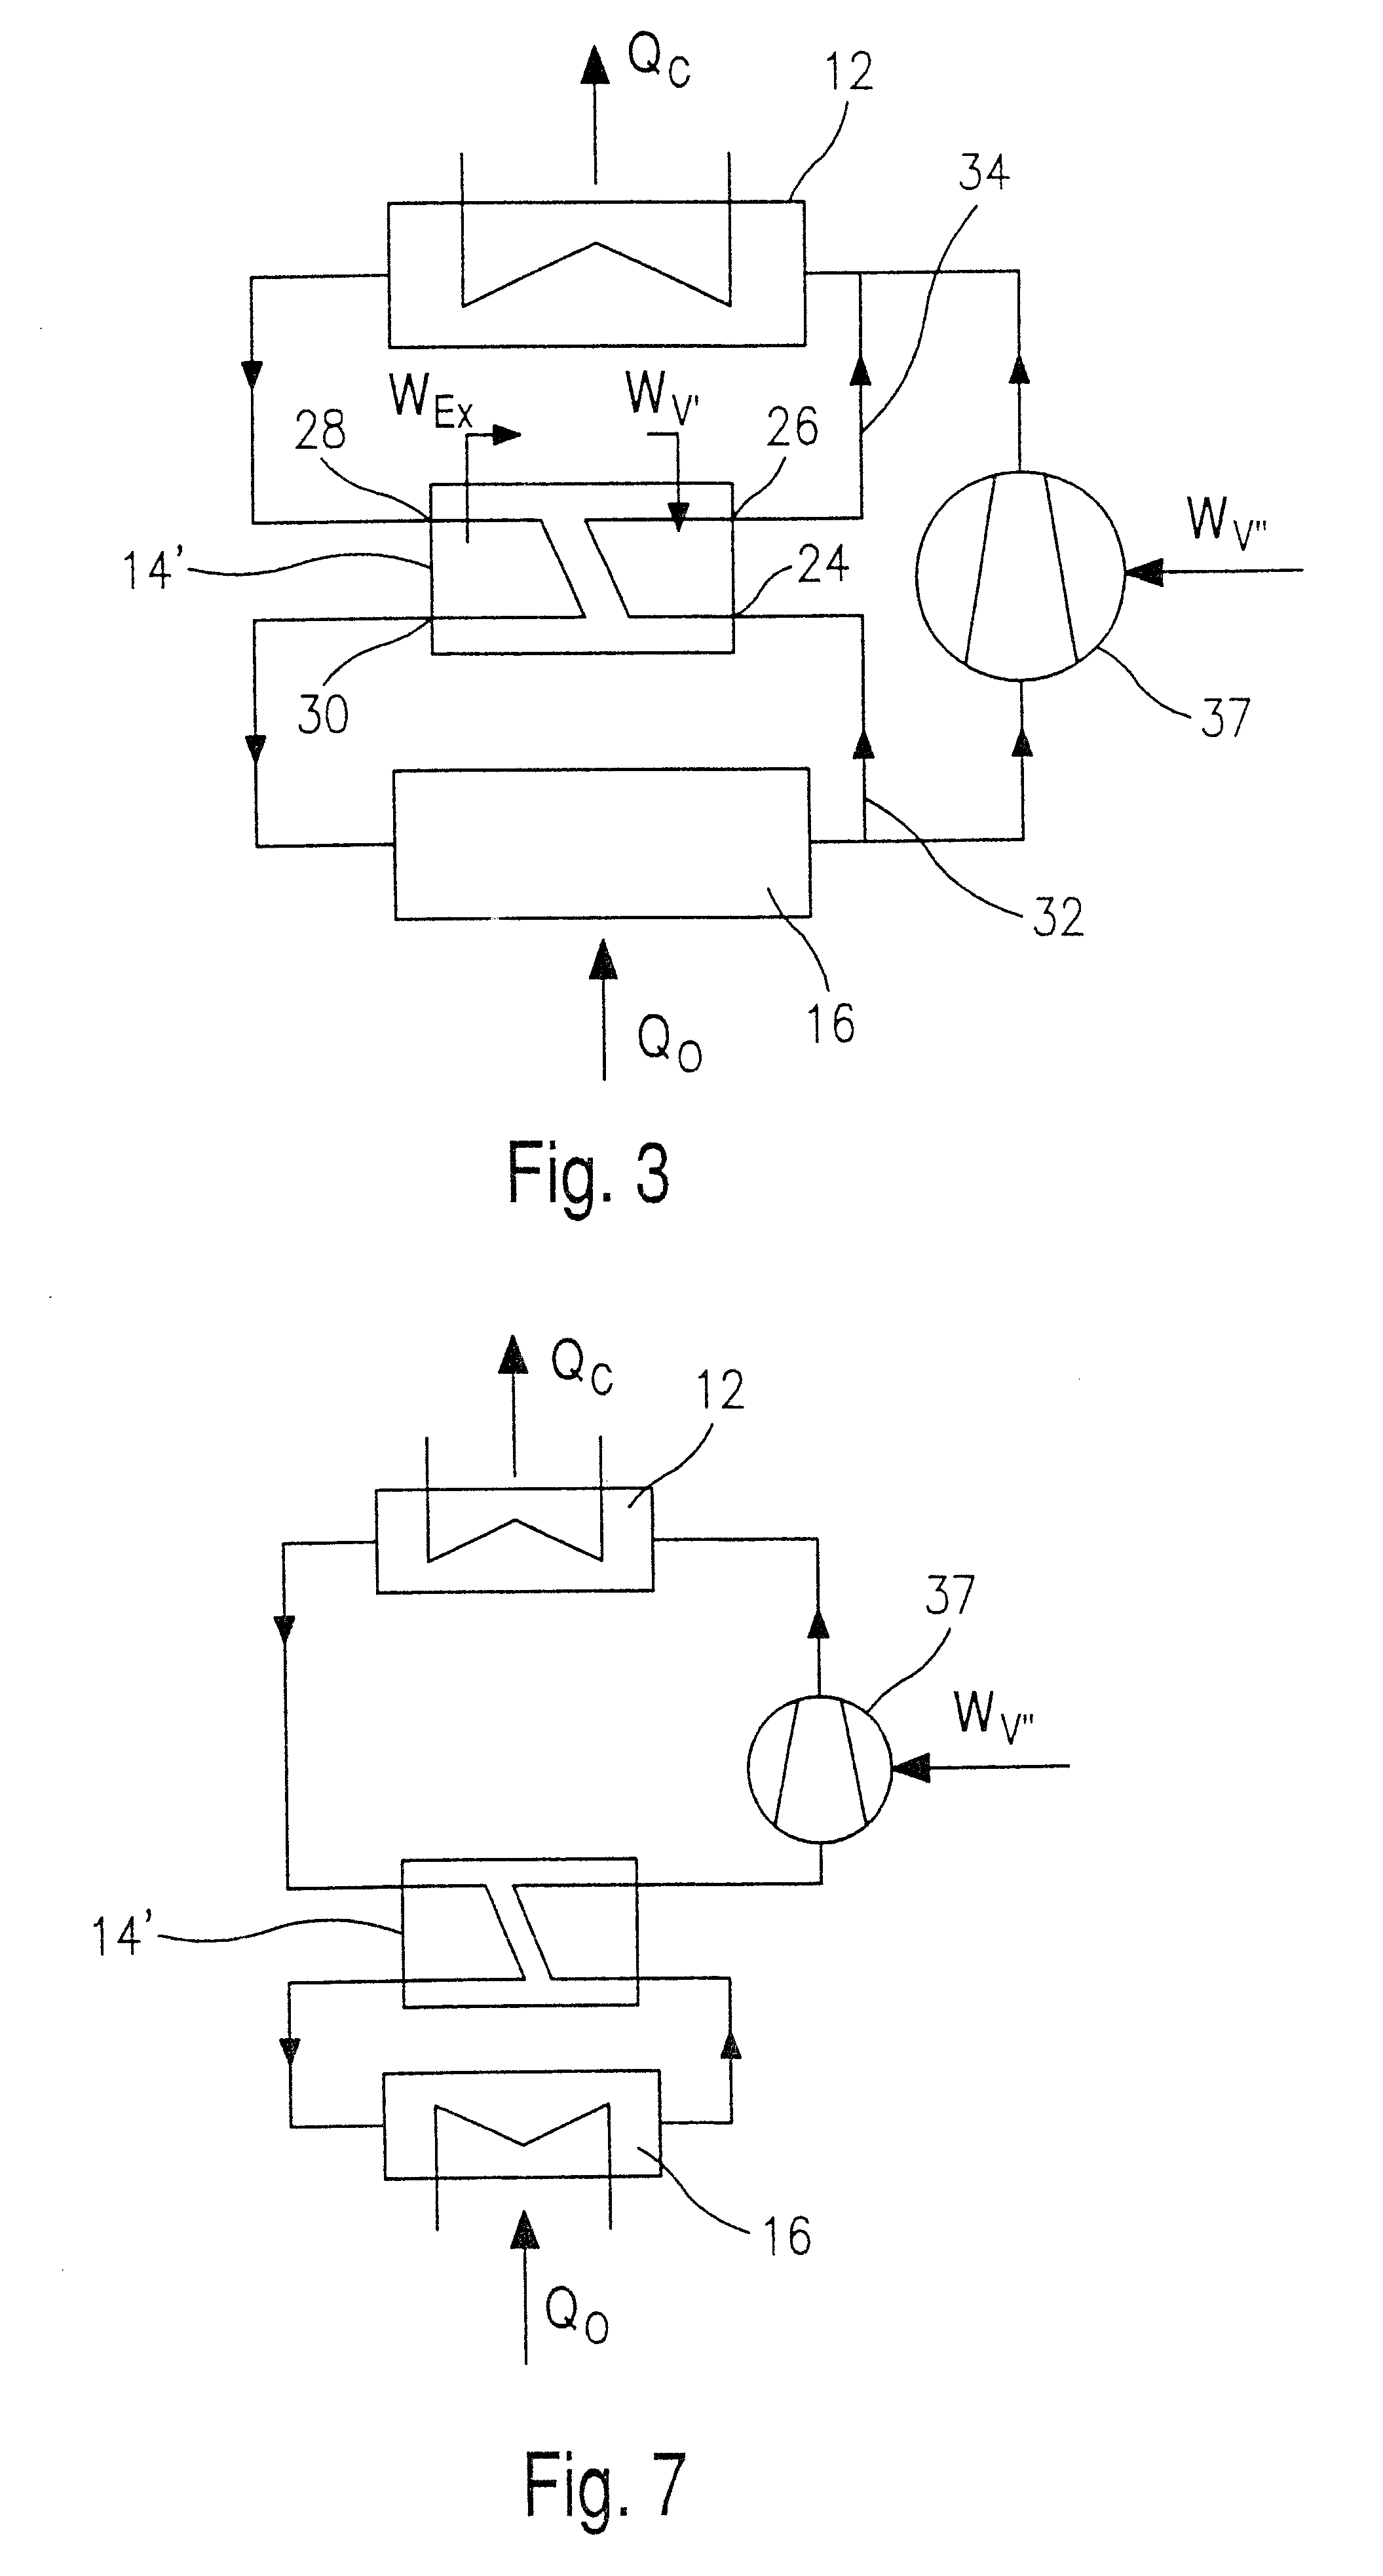 Motor vehicle air-conditioning system and a method for operating a motor vehicle air conditioning system